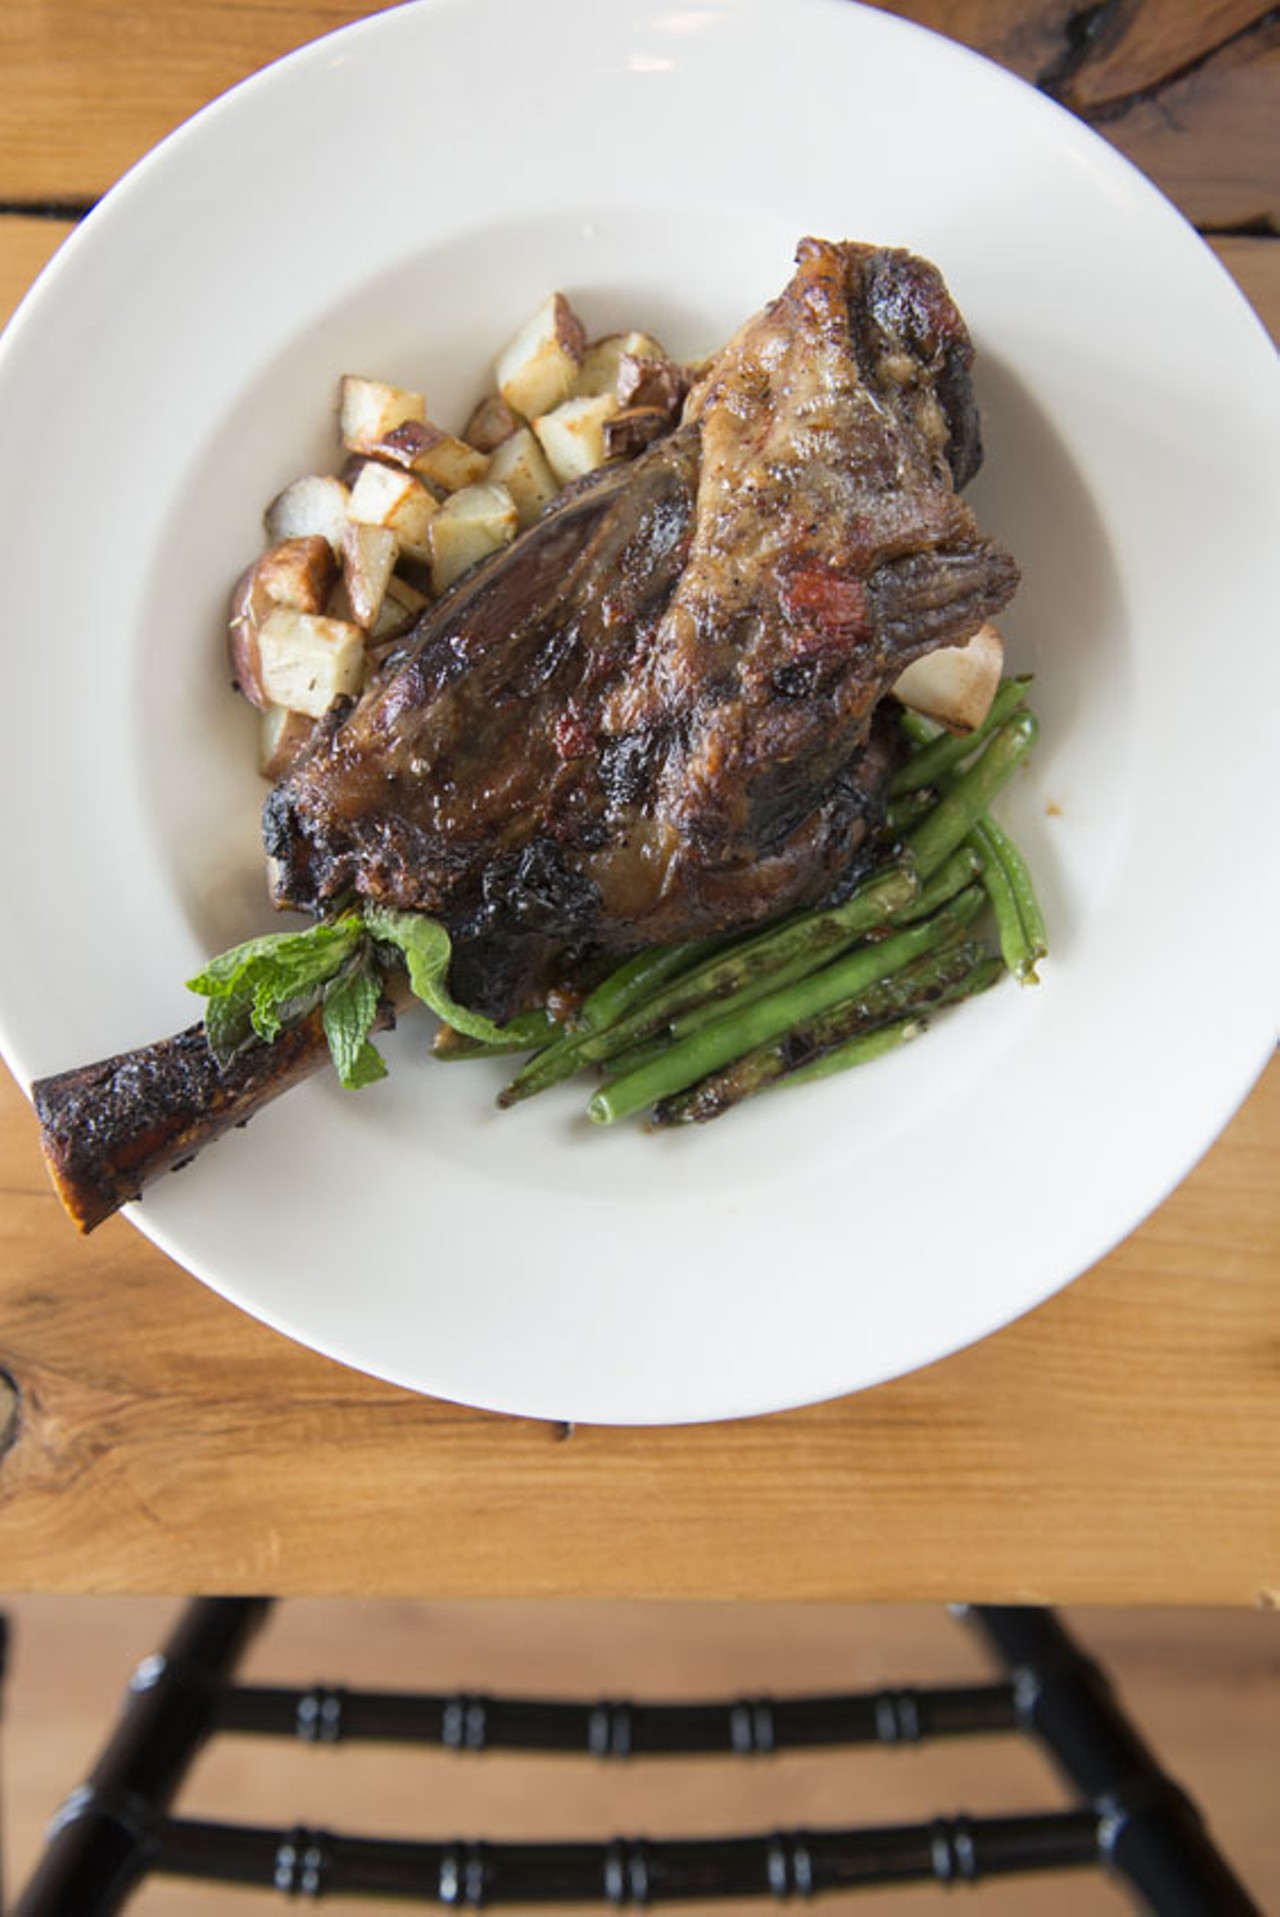 The lamb shank is slow roasted with tomatoes and basil, and it comes with vegetables.